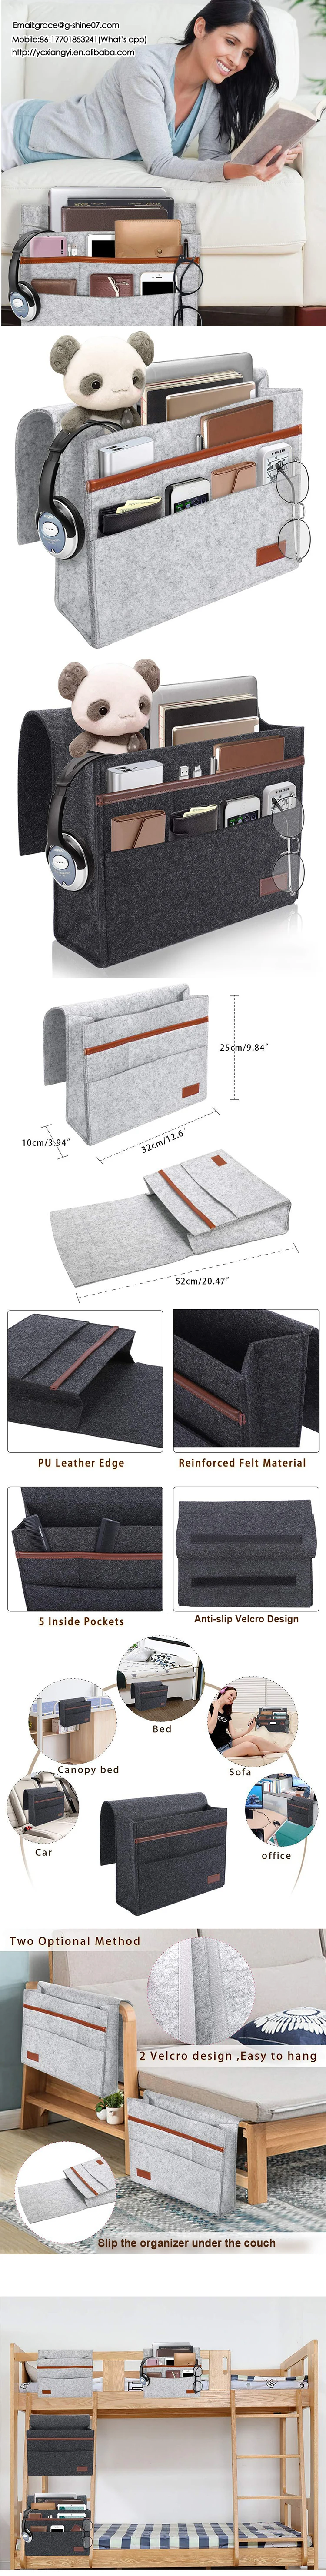 Hot Selling Large Capacity Felt Bedside Storage Bag for for Organizing Table Pad Magazine Books Phone Chargers Cable